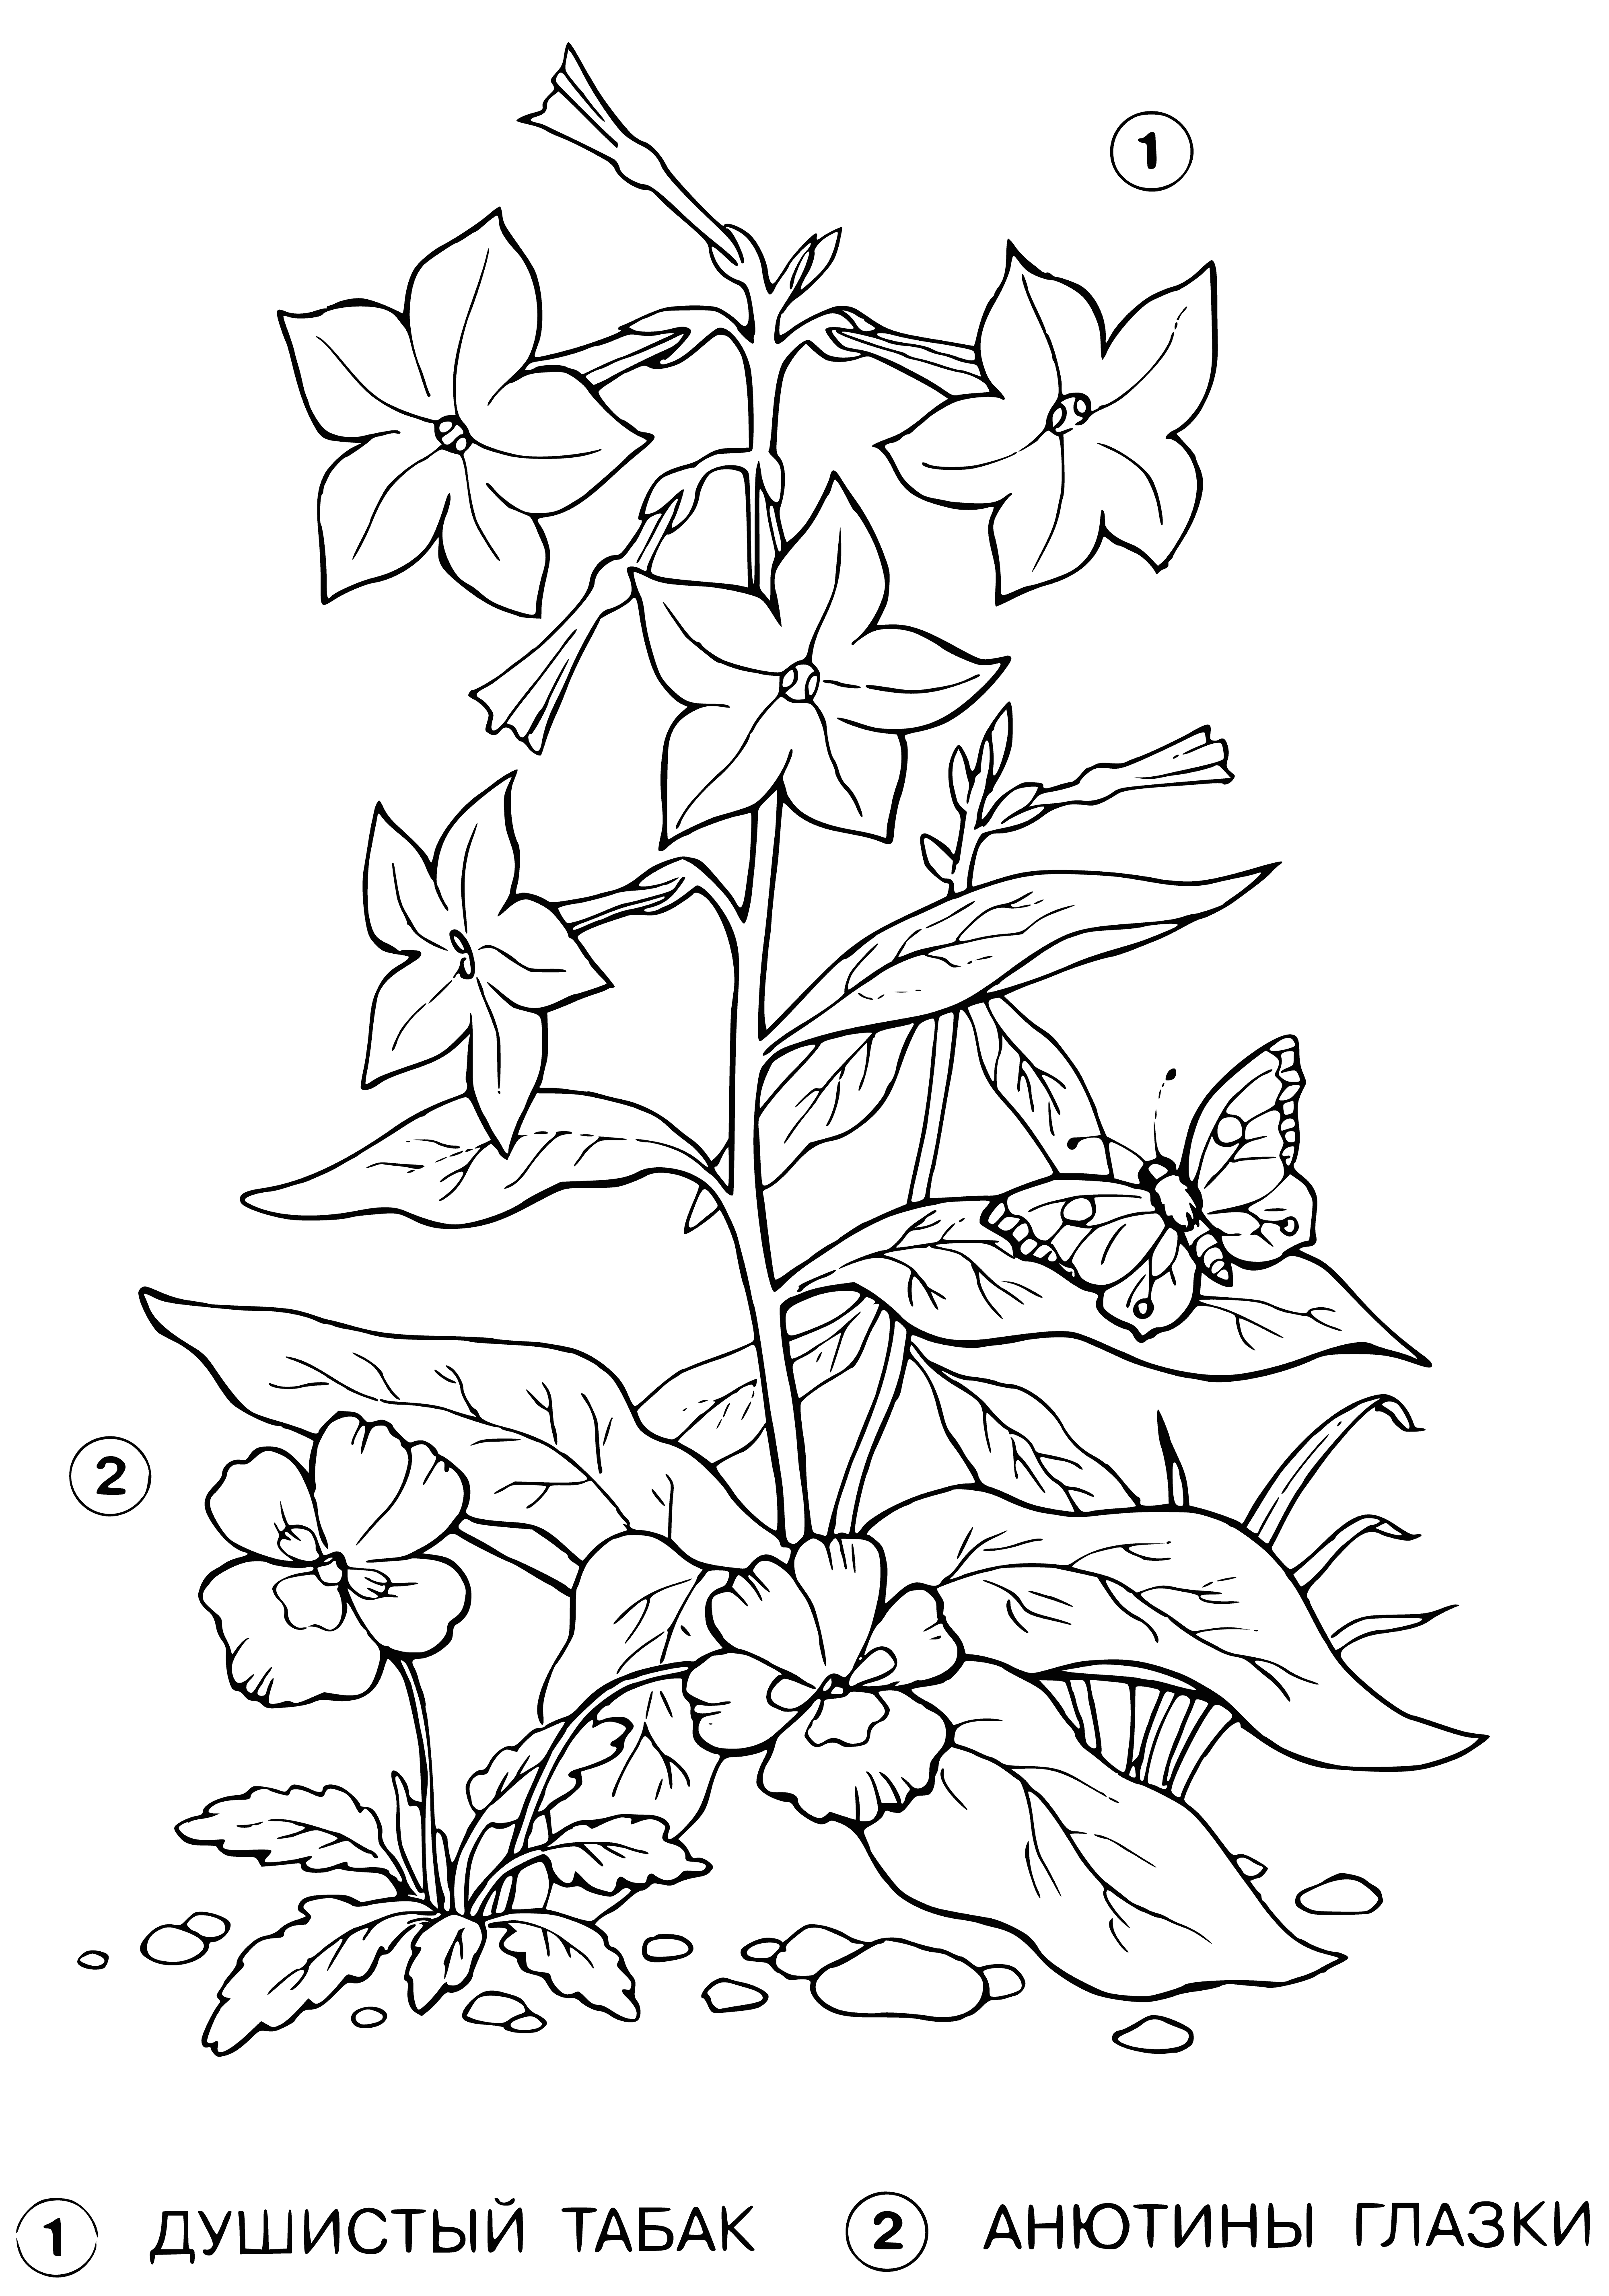 Fragrant tobacco and pansies coloring page